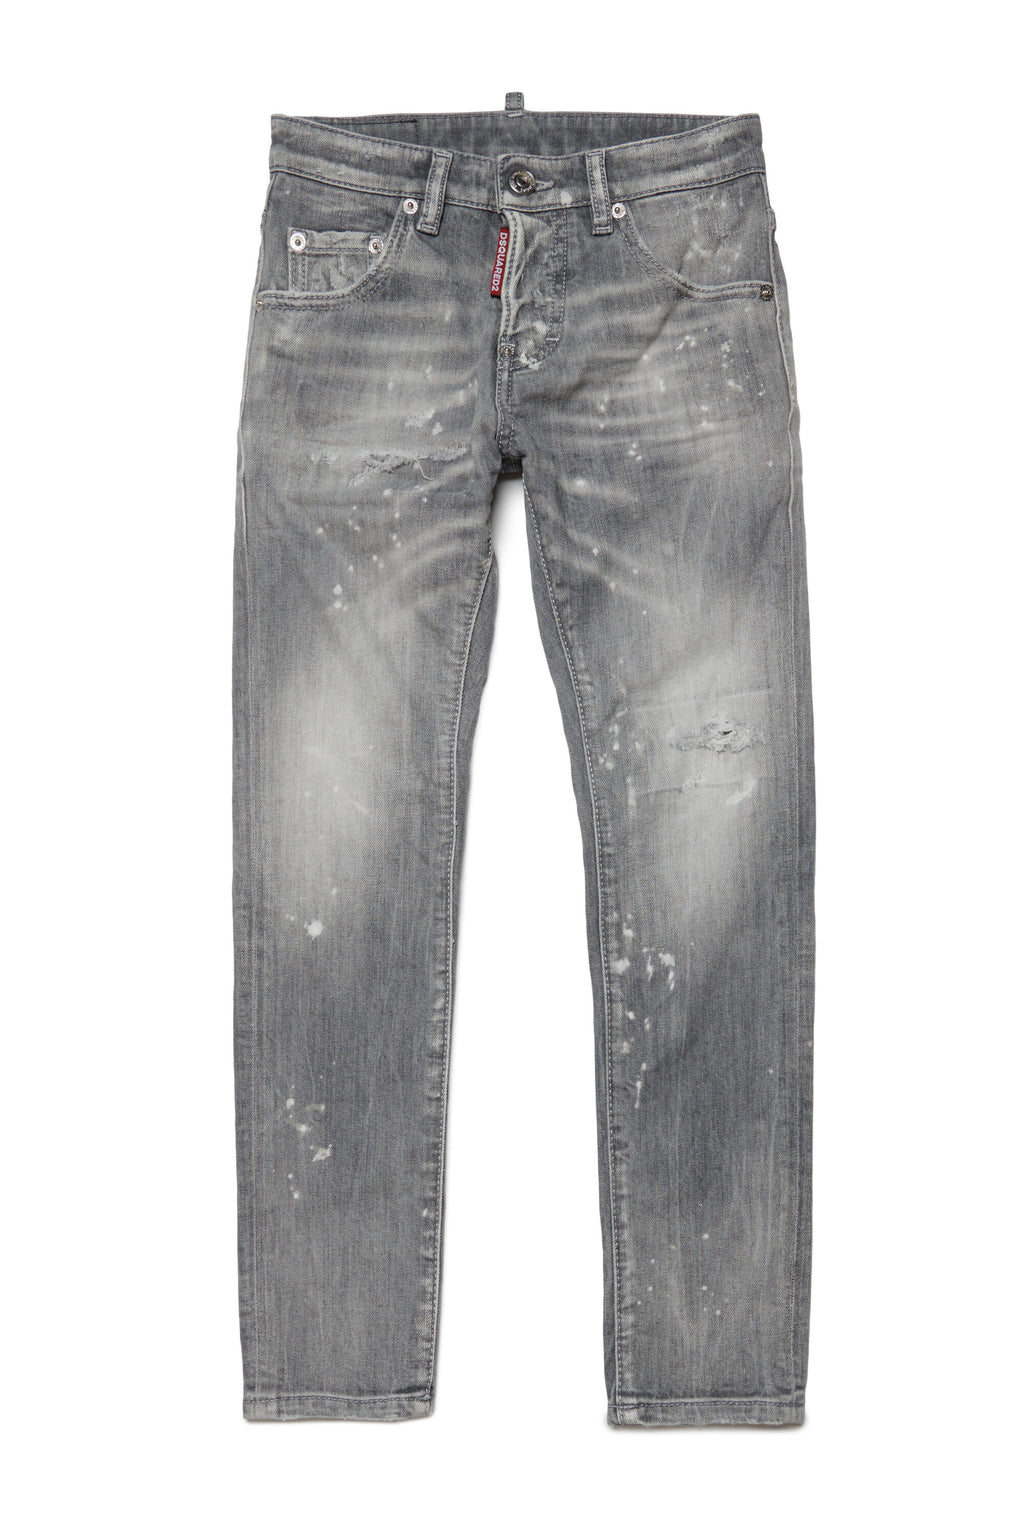 Speckled gray skinny jeans - Cool Guy